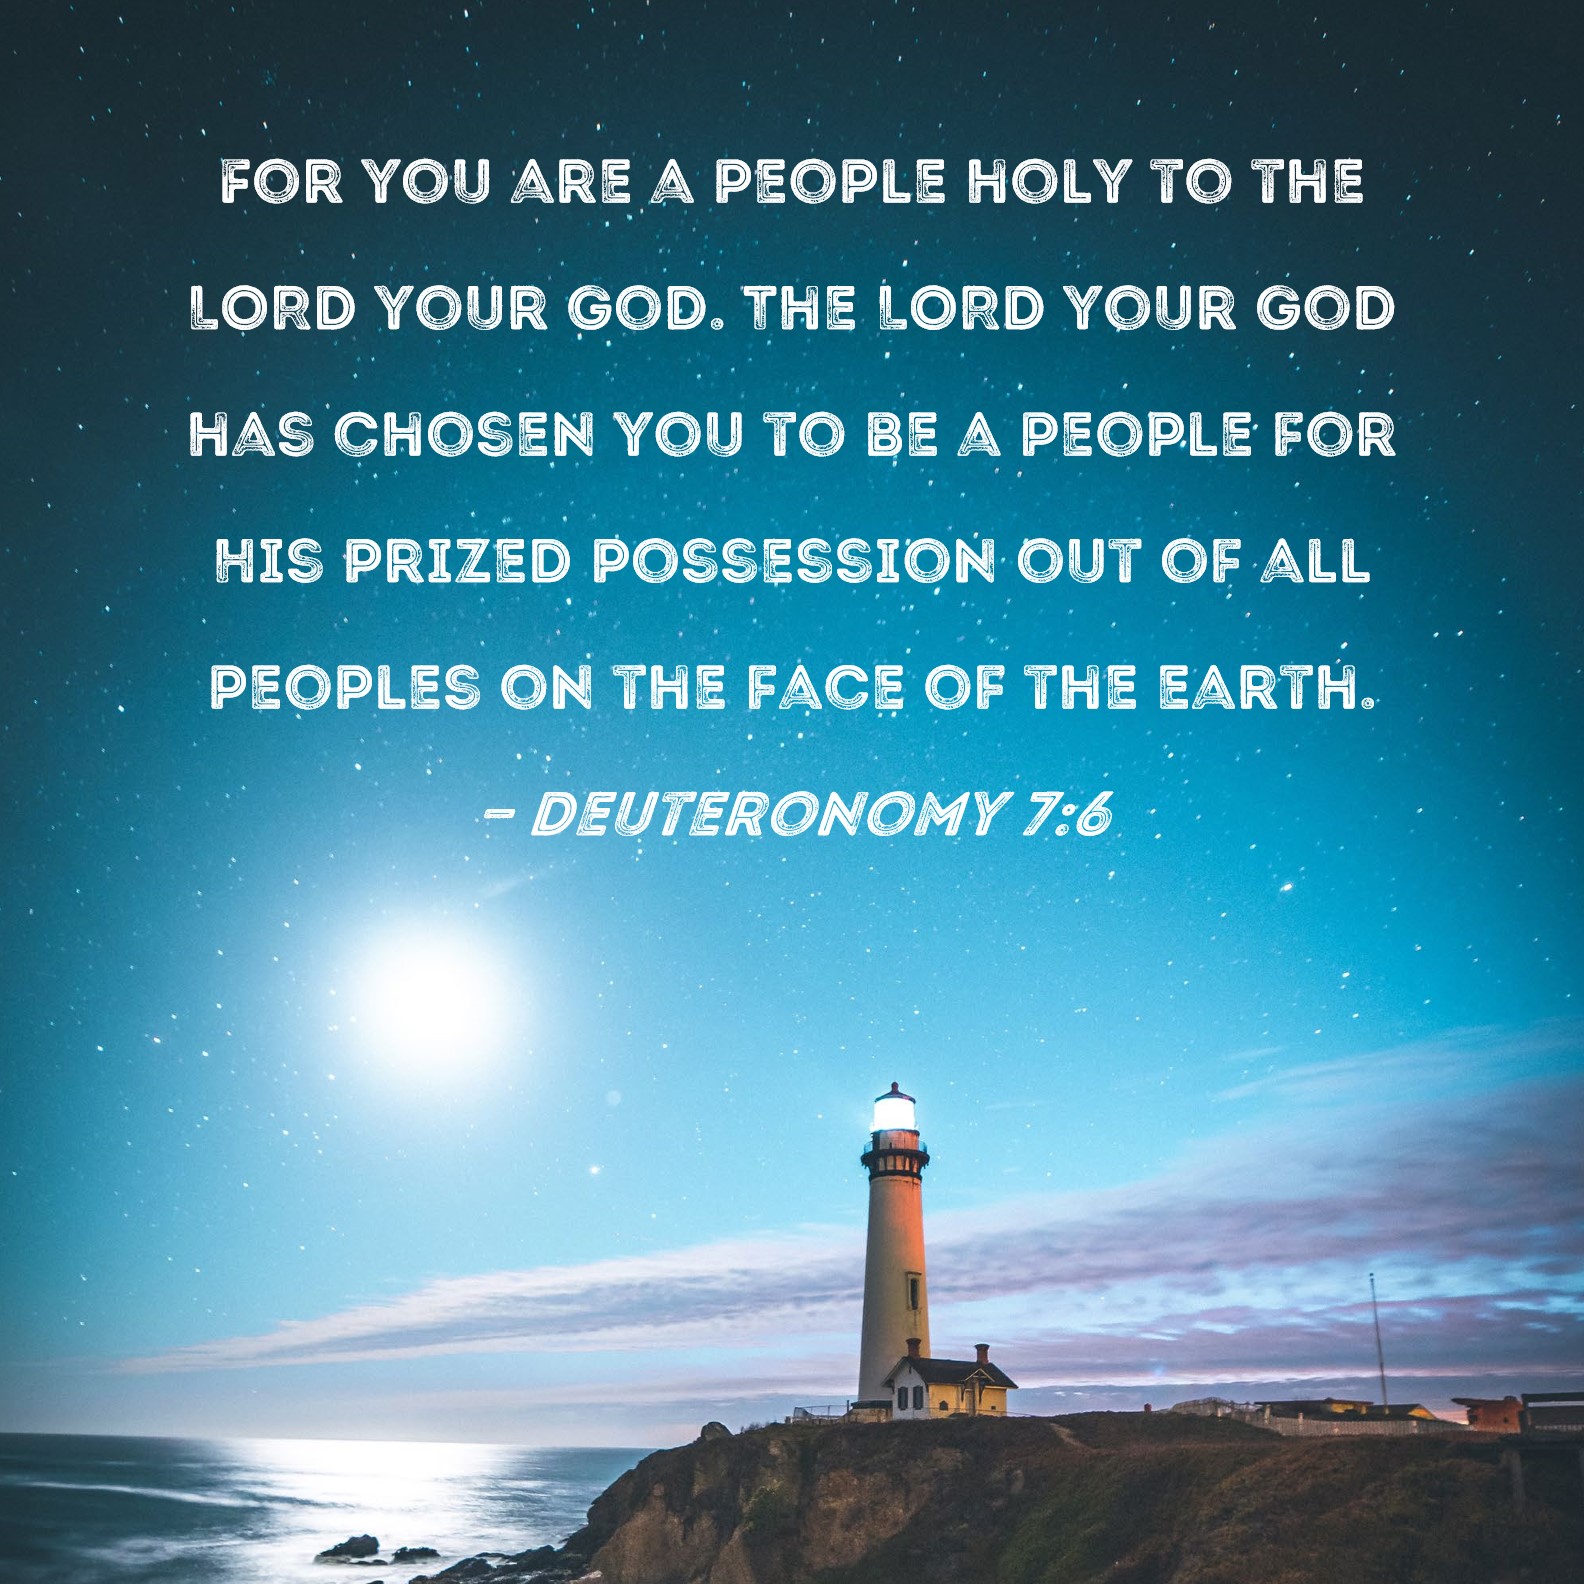 Deuteronomy 7:6 For you are a people holy to the LORD your God. The LORD  your God has chosen you to be a people for His prized possession out of all  peoples